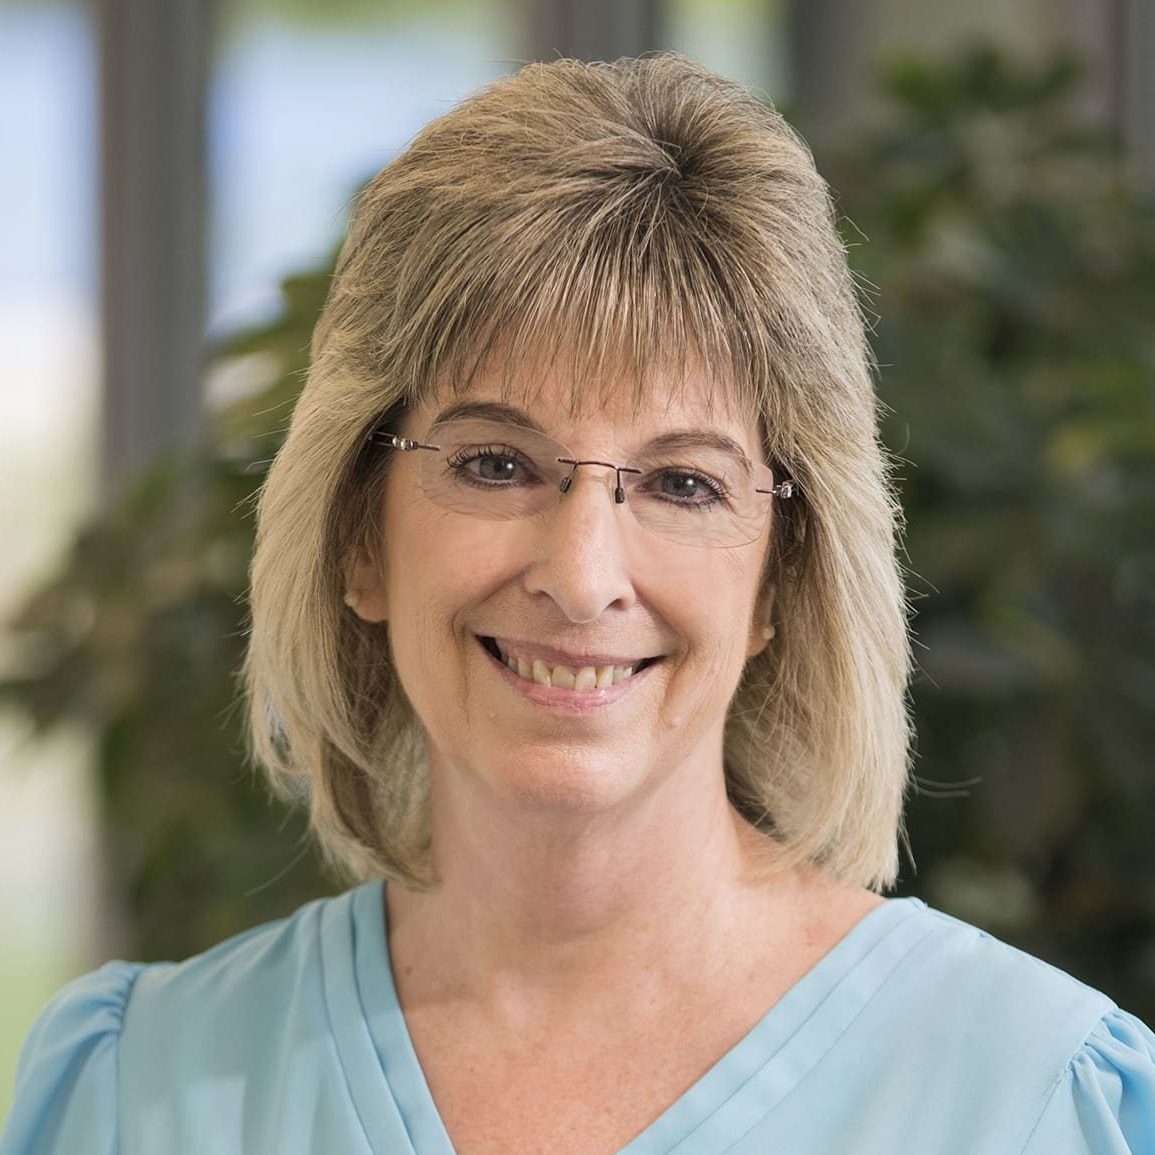 Anne Reitz, WHNPC, is an experienced nurse practitioner working in conjunction with Dr. Tom Miller